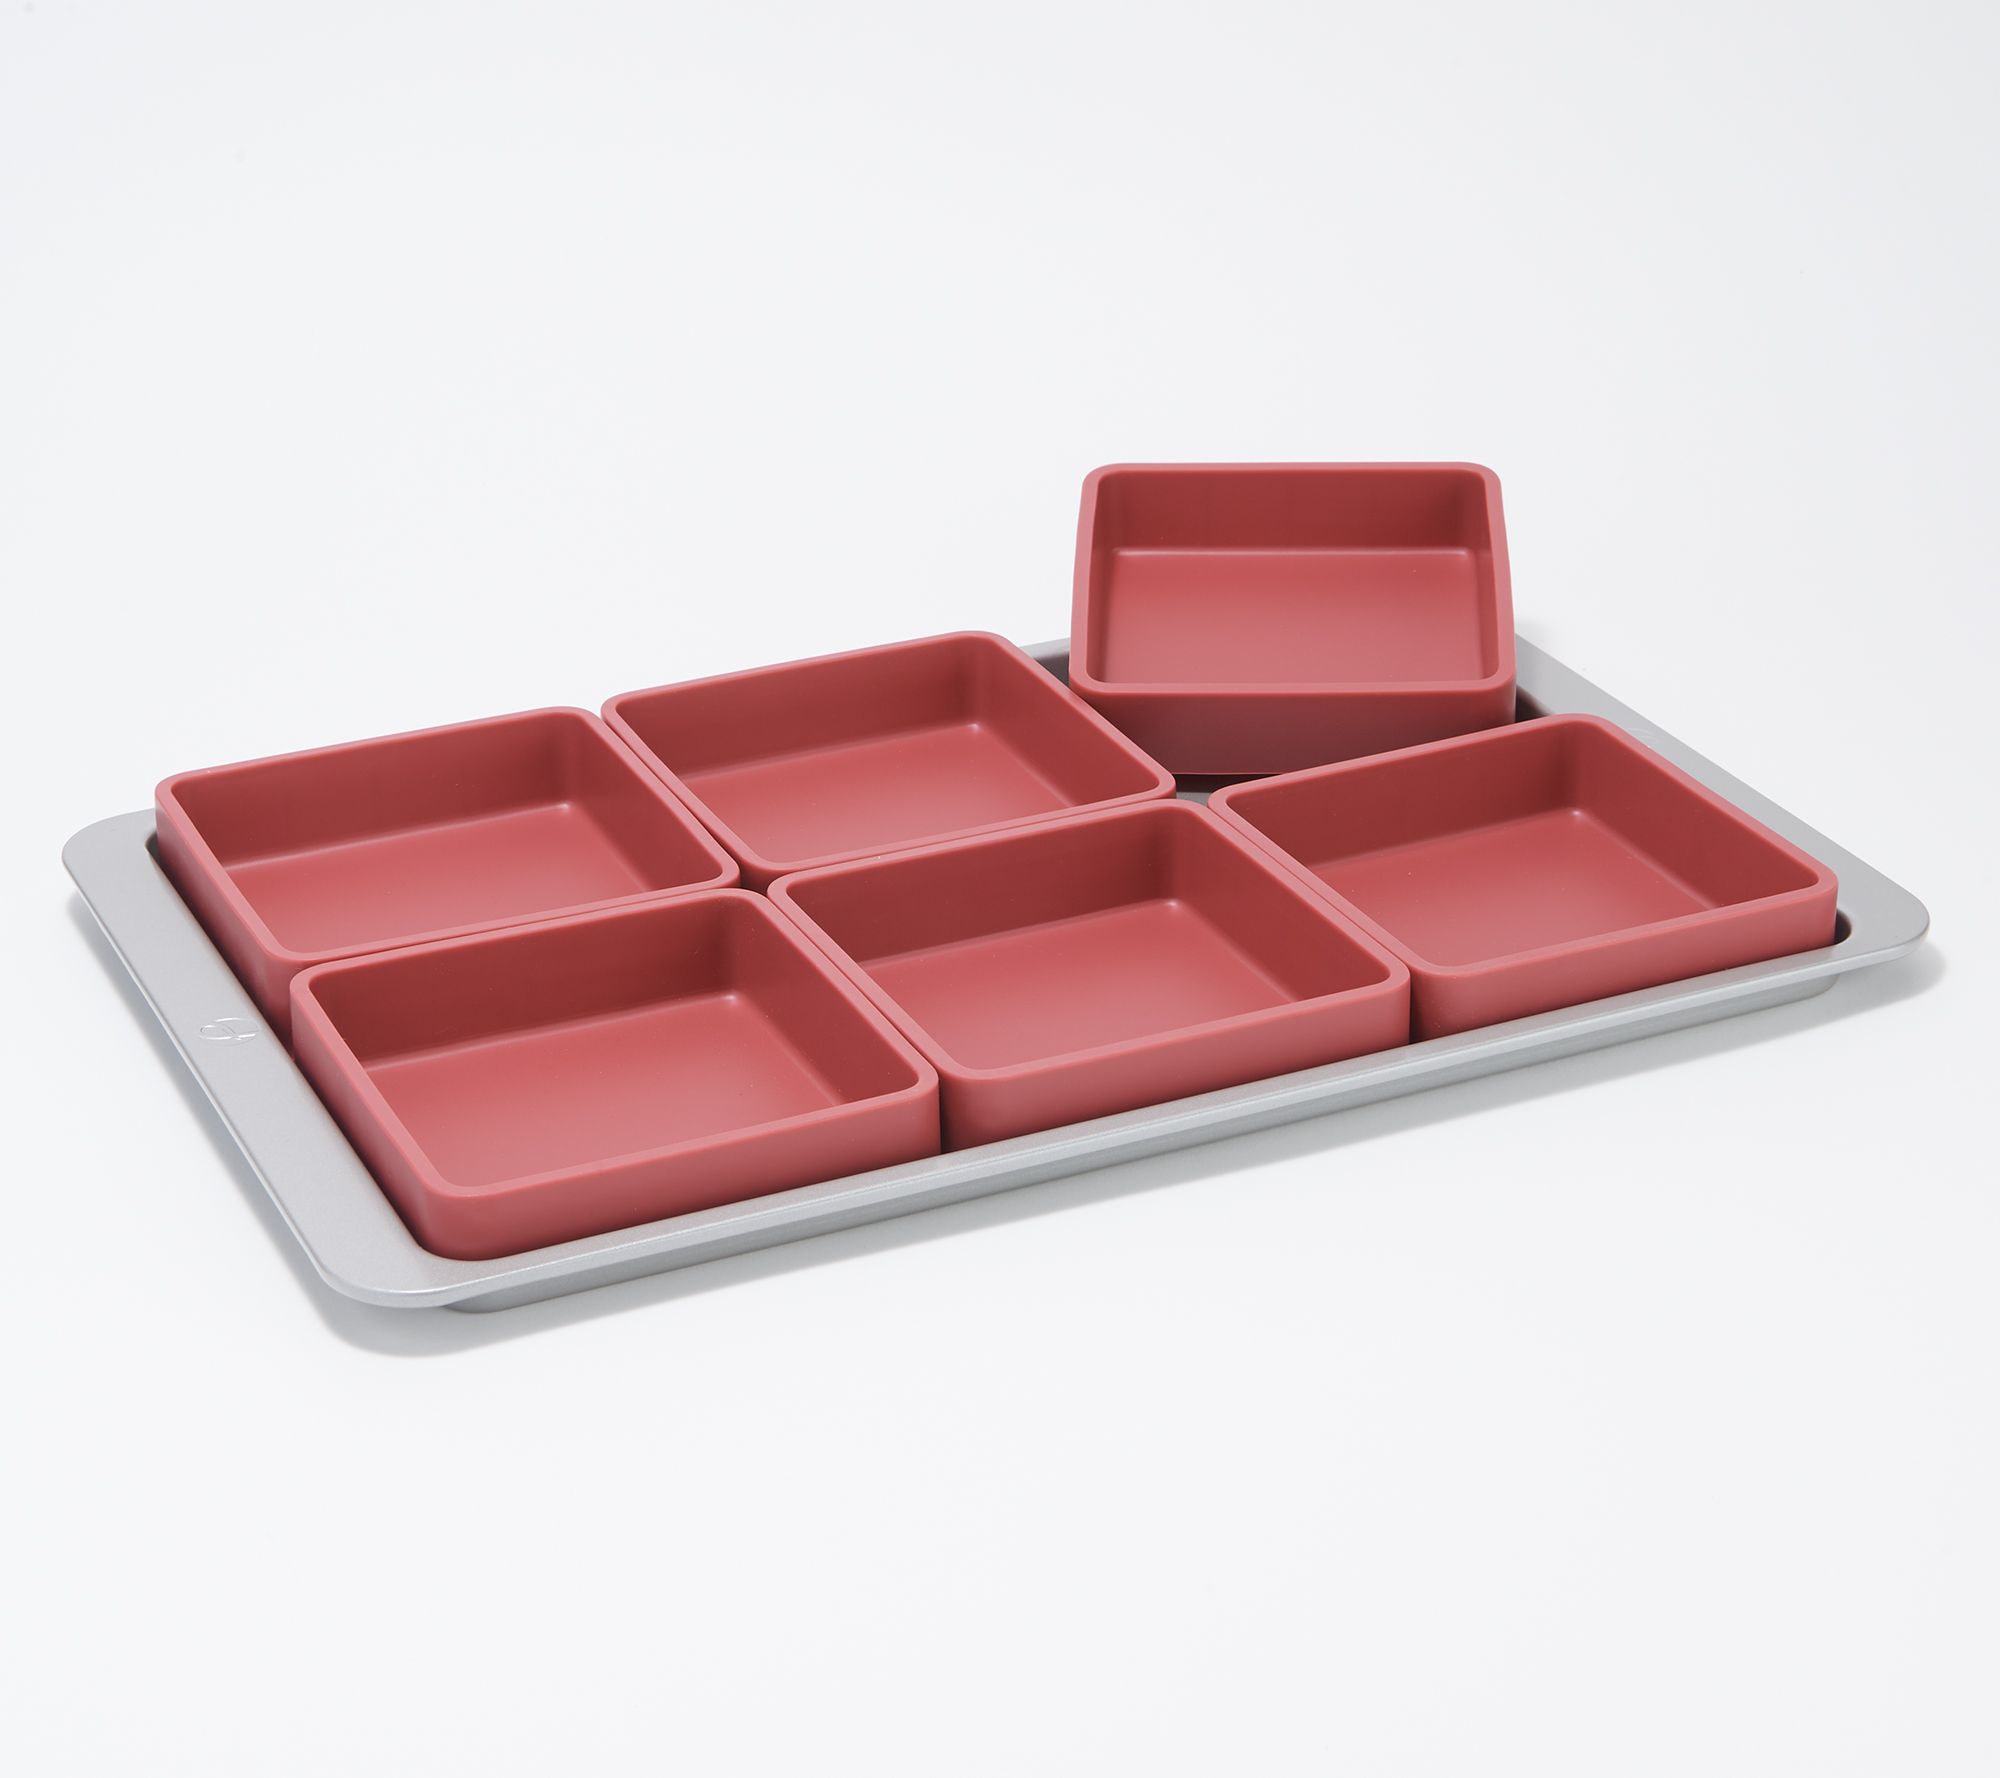 Prepd Cheat Sheets Pro Set S/10 Silicone Nonstick Baking Trays 